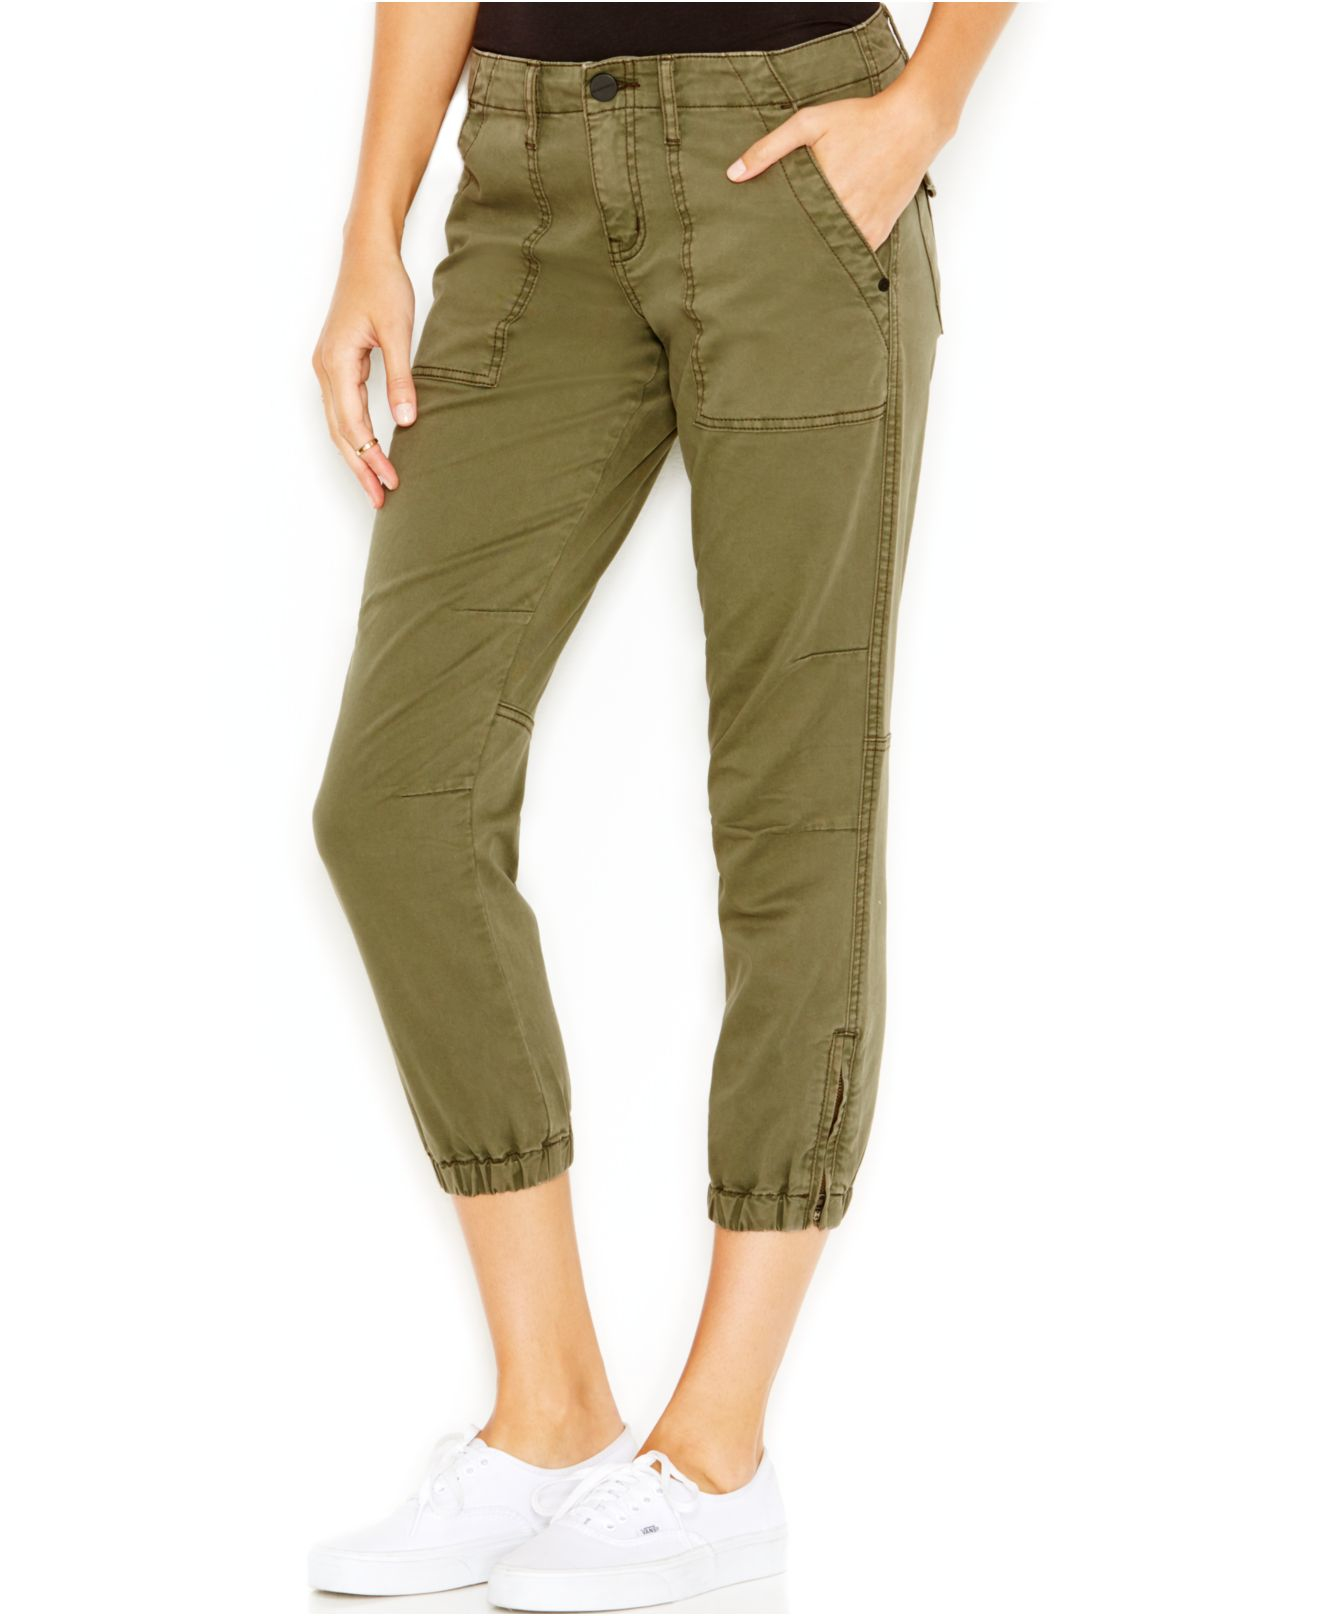 Lyst - Sanctuary Cropped Cargo Pants in Green